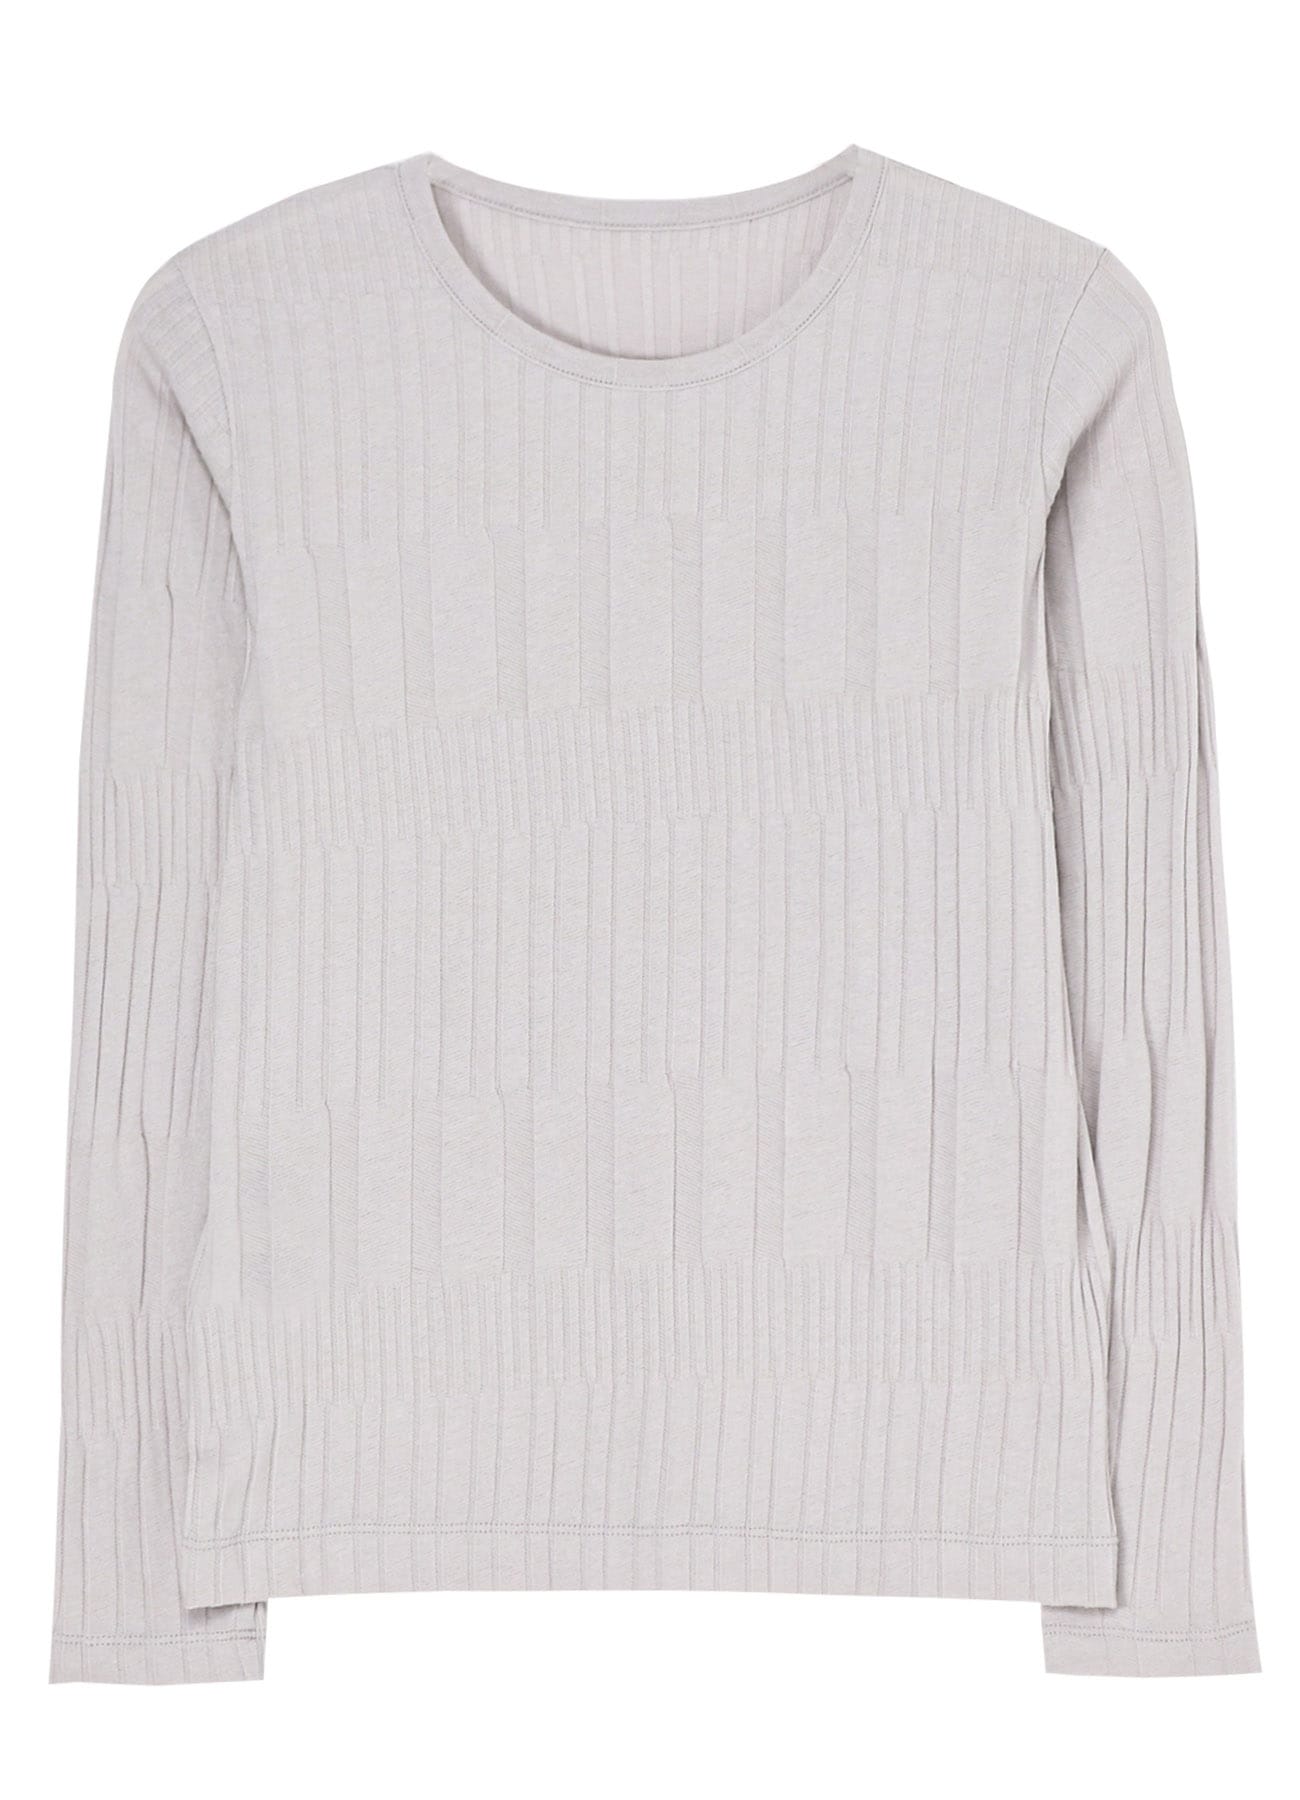 40/ COTTON HARD TWISTED WRINKLED RIBBED LONG SLEEVE T